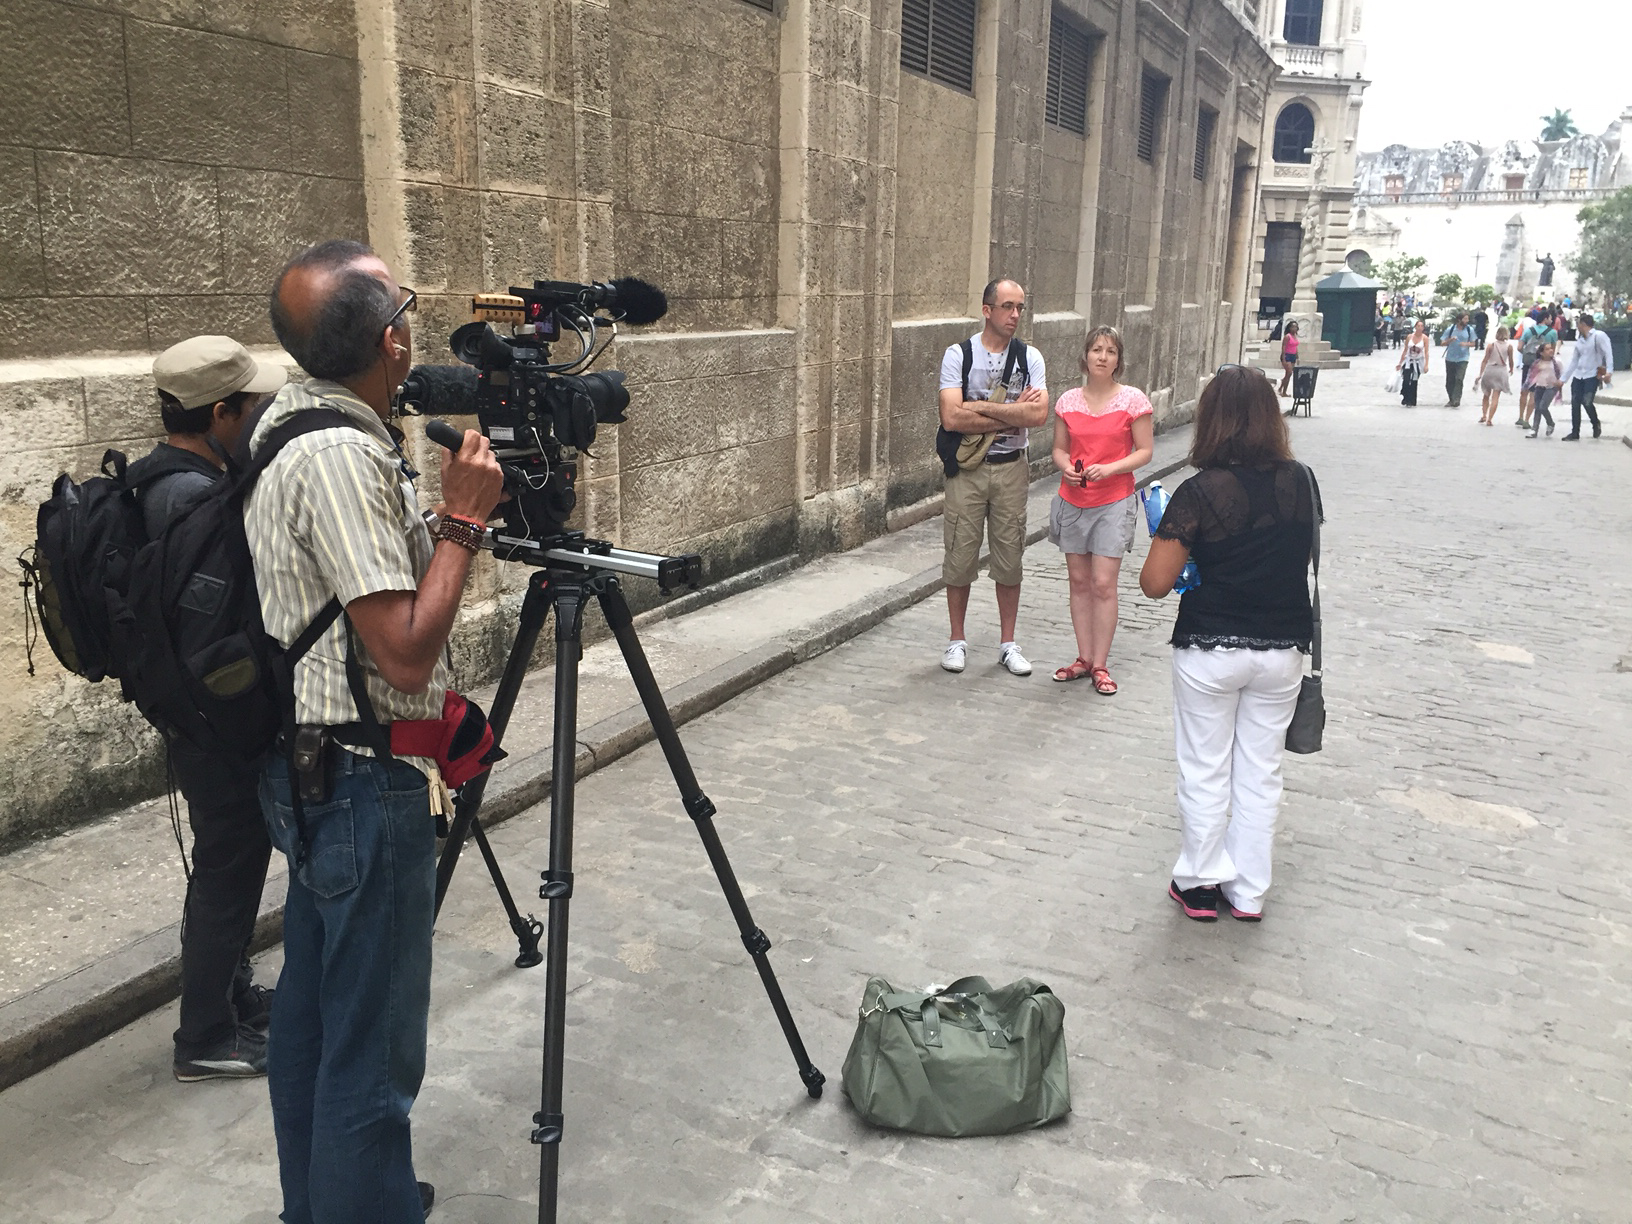  CUBA- The production team filmed an interview with a french tourist, Bandey Severine. They talked about how they wanted to visit Cuba before it starts changing due to the new relations. 

El equipo de producción filmó una entrevista con una turista 